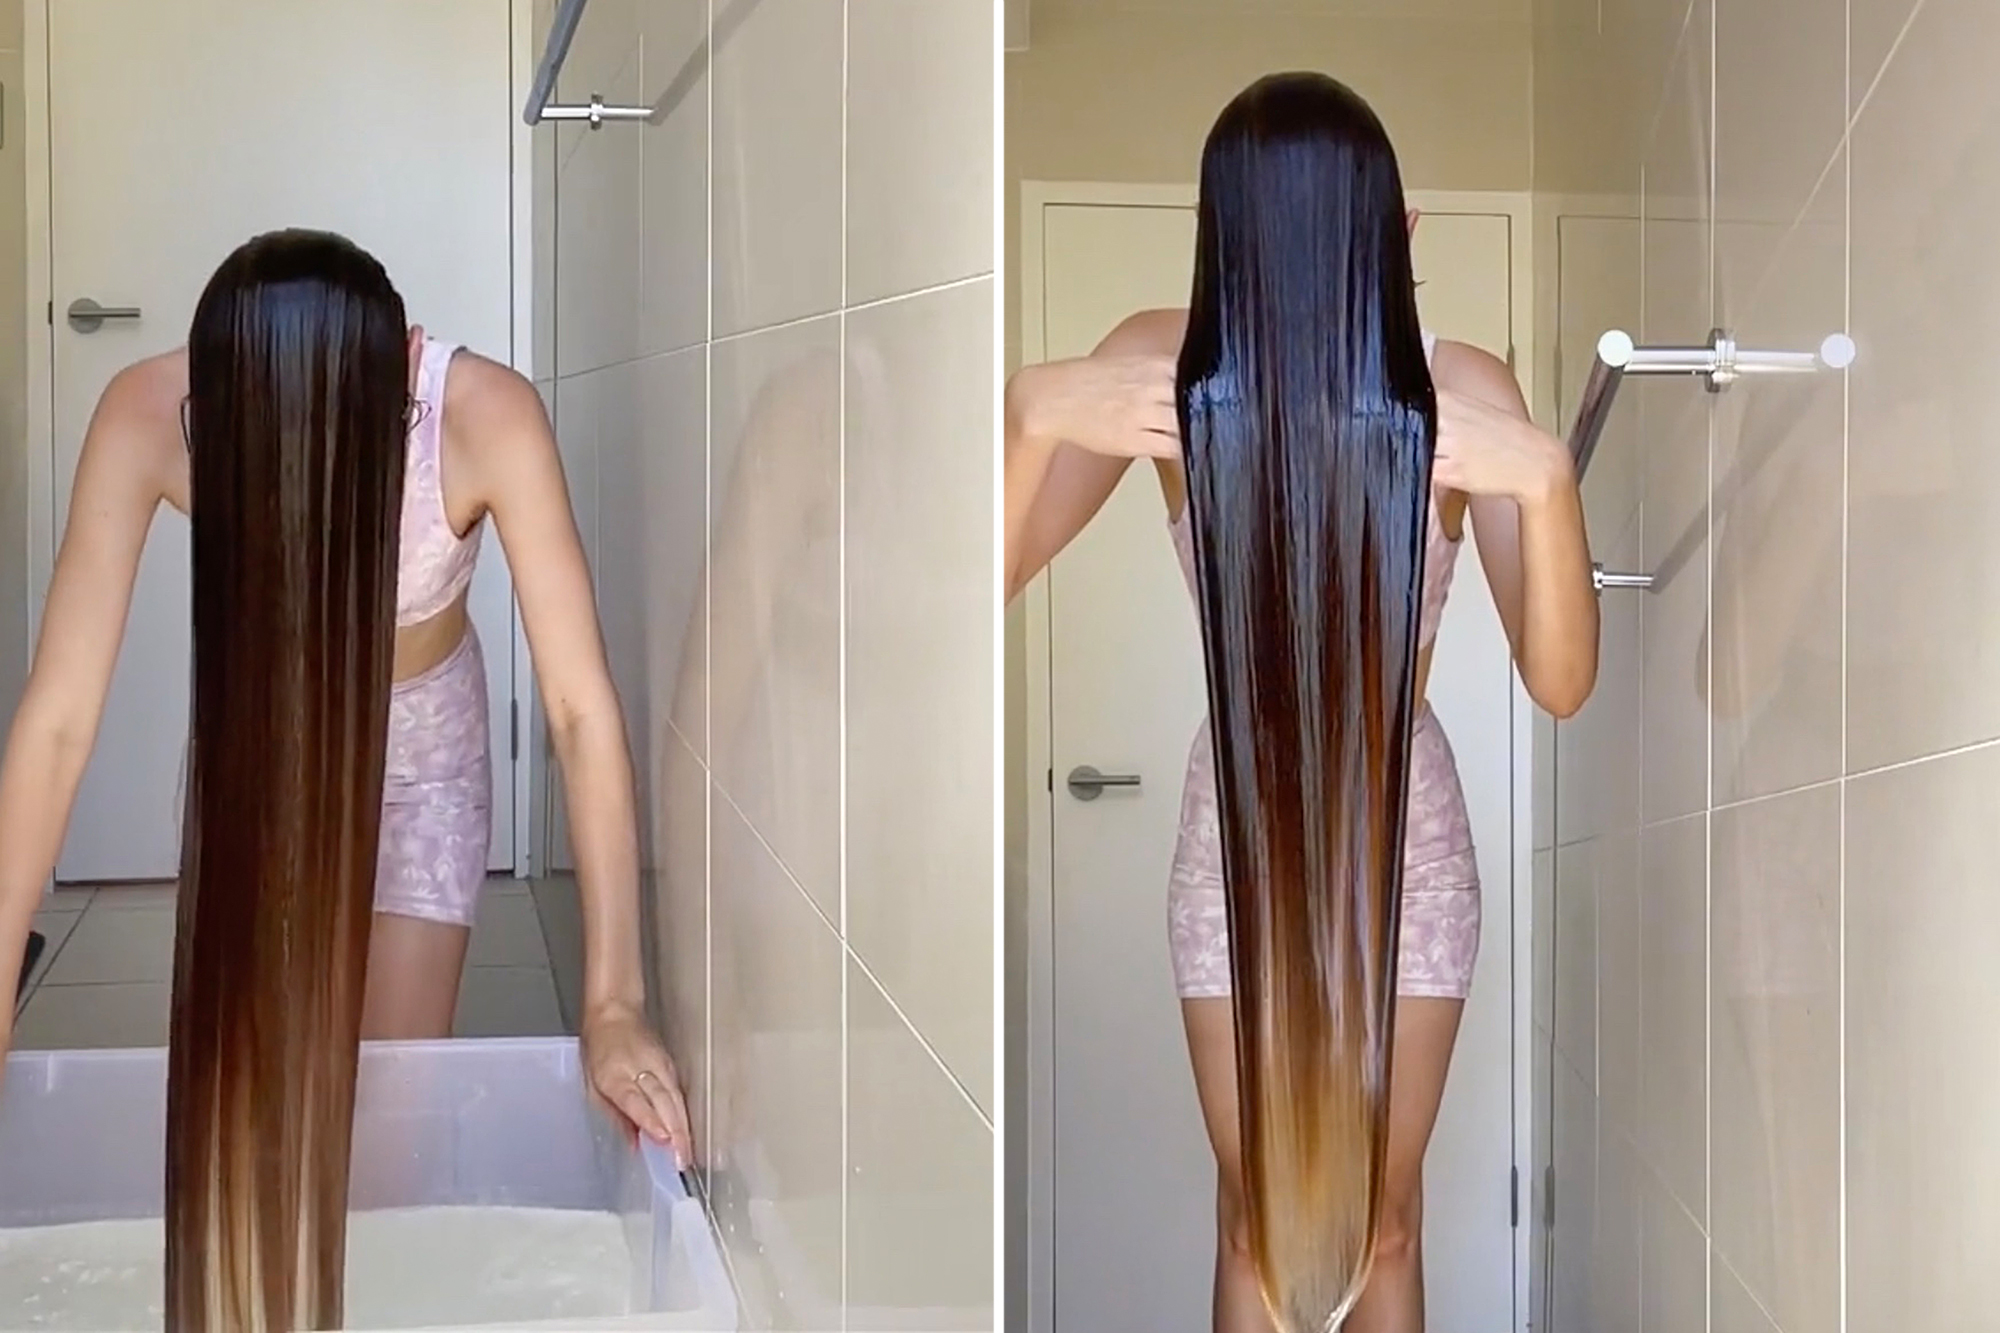 The real-life Rapunzel has revealed when to comb your hair to avoid breakage.